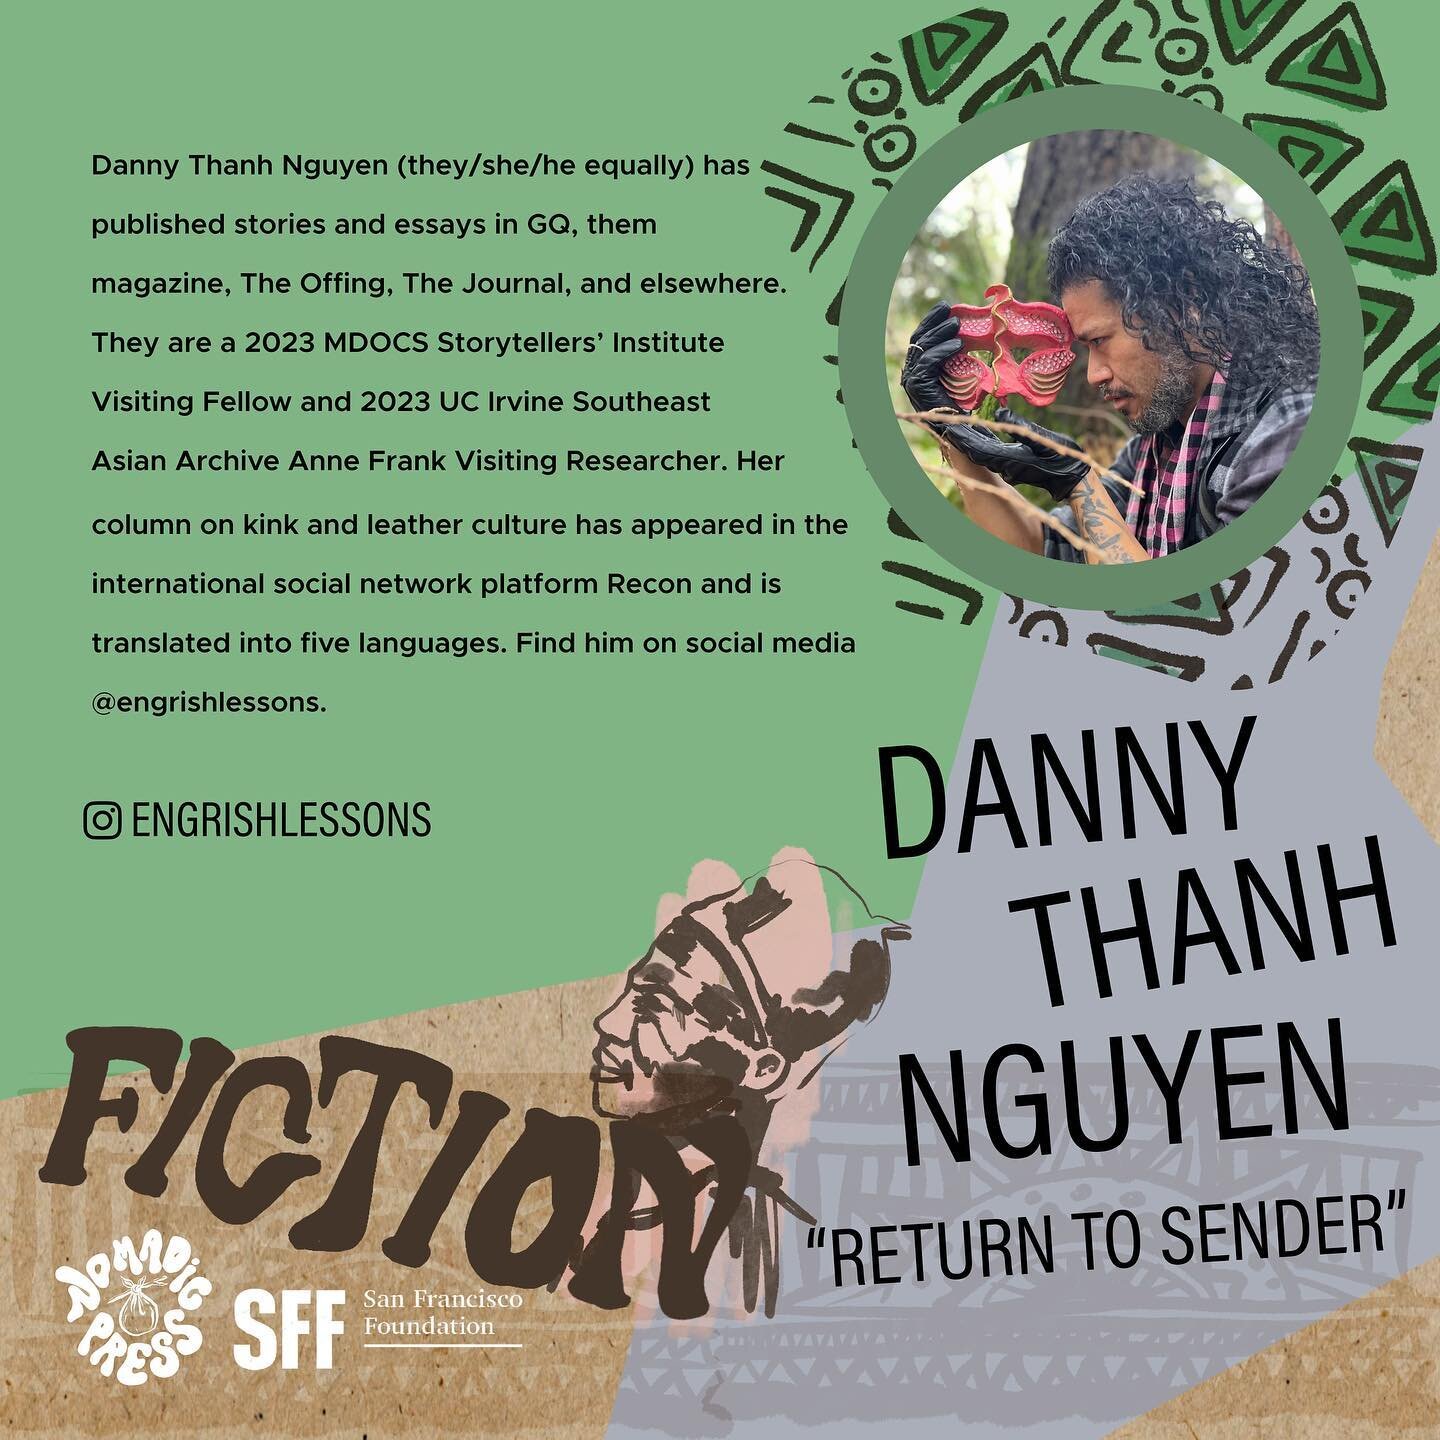 Congratulations to Danny Thanh Nguyen on being awarded the 2023 San Francisco Foundation/Nomadic Press Literary Award in Fiction! Danny has won $5000 for her short story &ldquo;Return to Sender&rdquo;. Follow Danny on social media and join us in cele